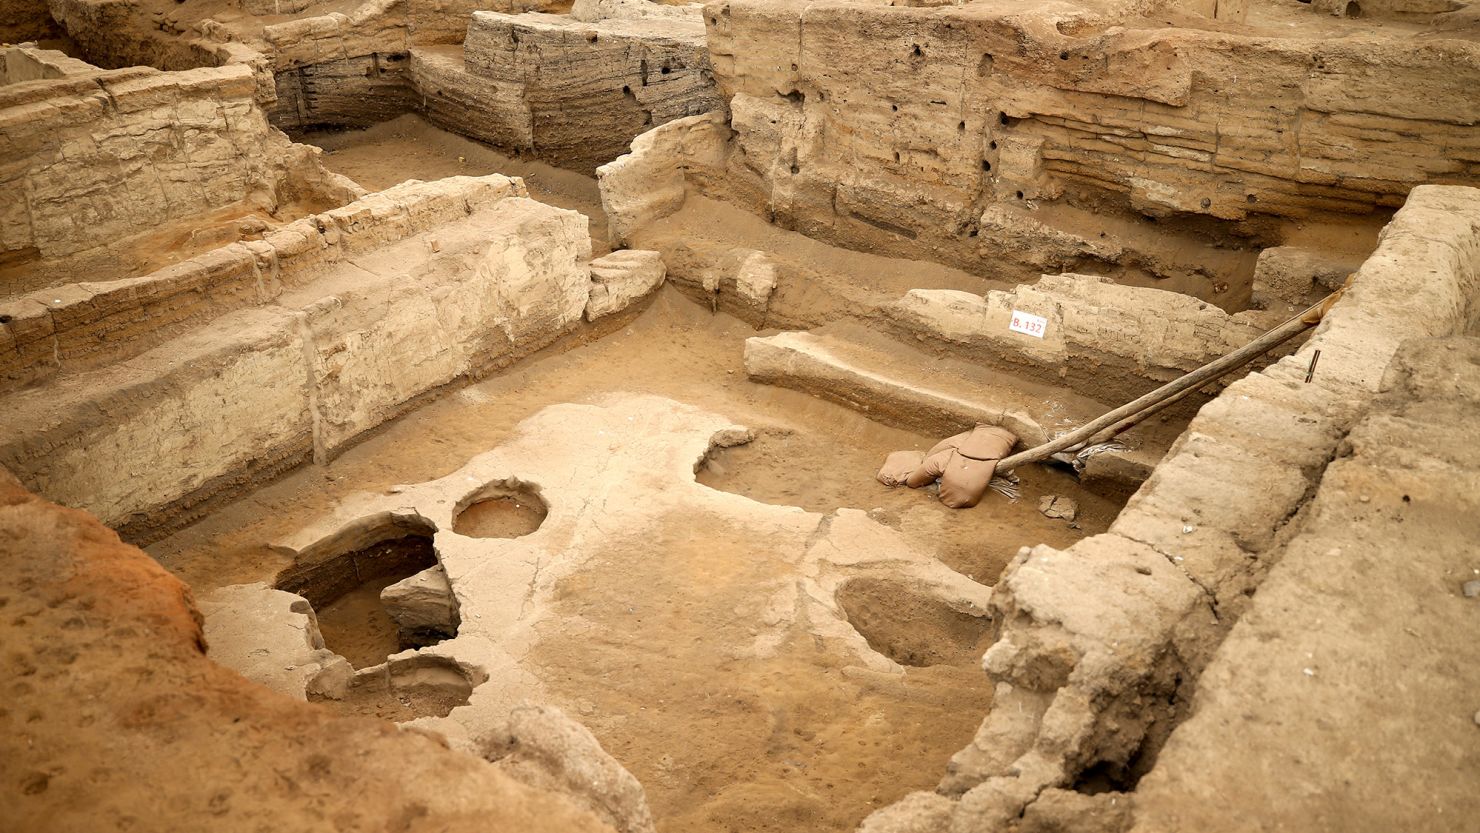 The 8,600-year-old bread was found at the Neolithic archeological site of Çatalhöyük, a UNESCO World Heritage site, at Cumra district in Konya, Turkey.